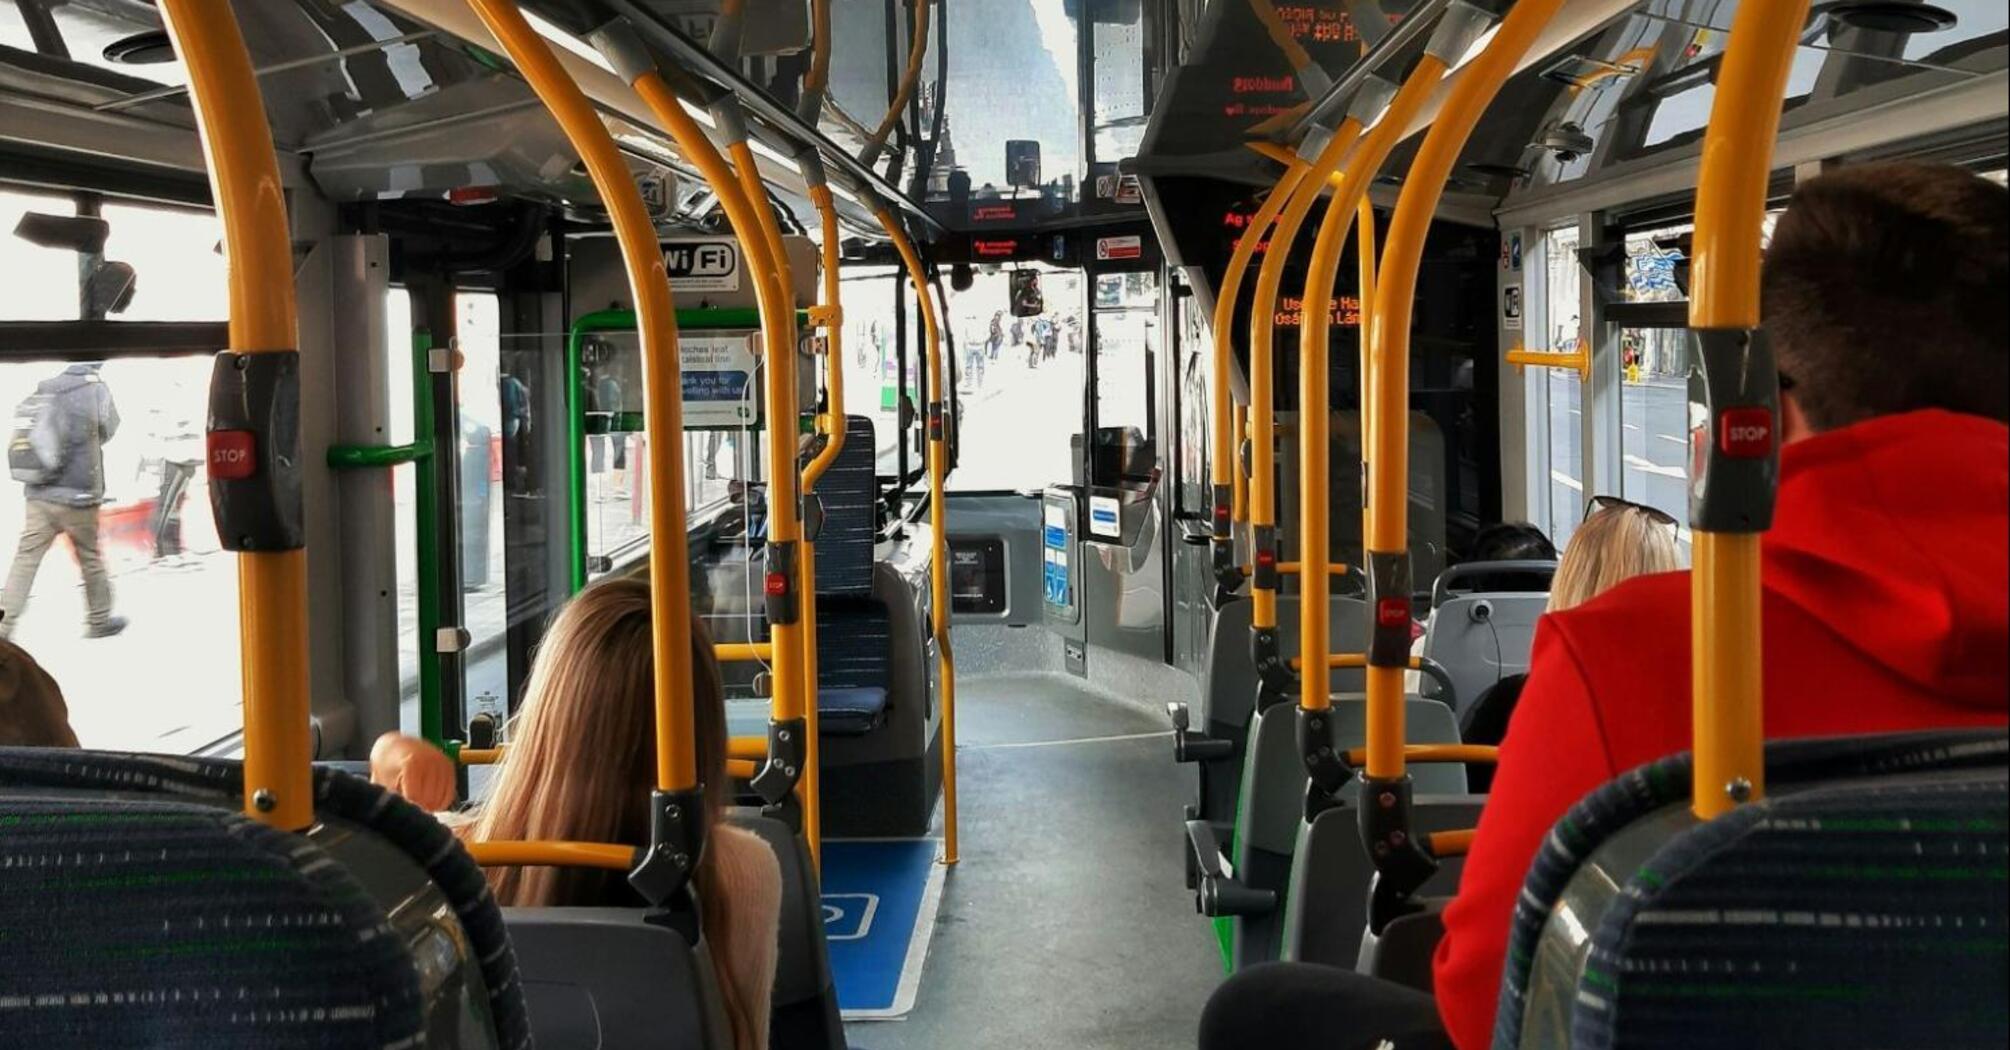 Passengers inside a modern bus with yellow handrails